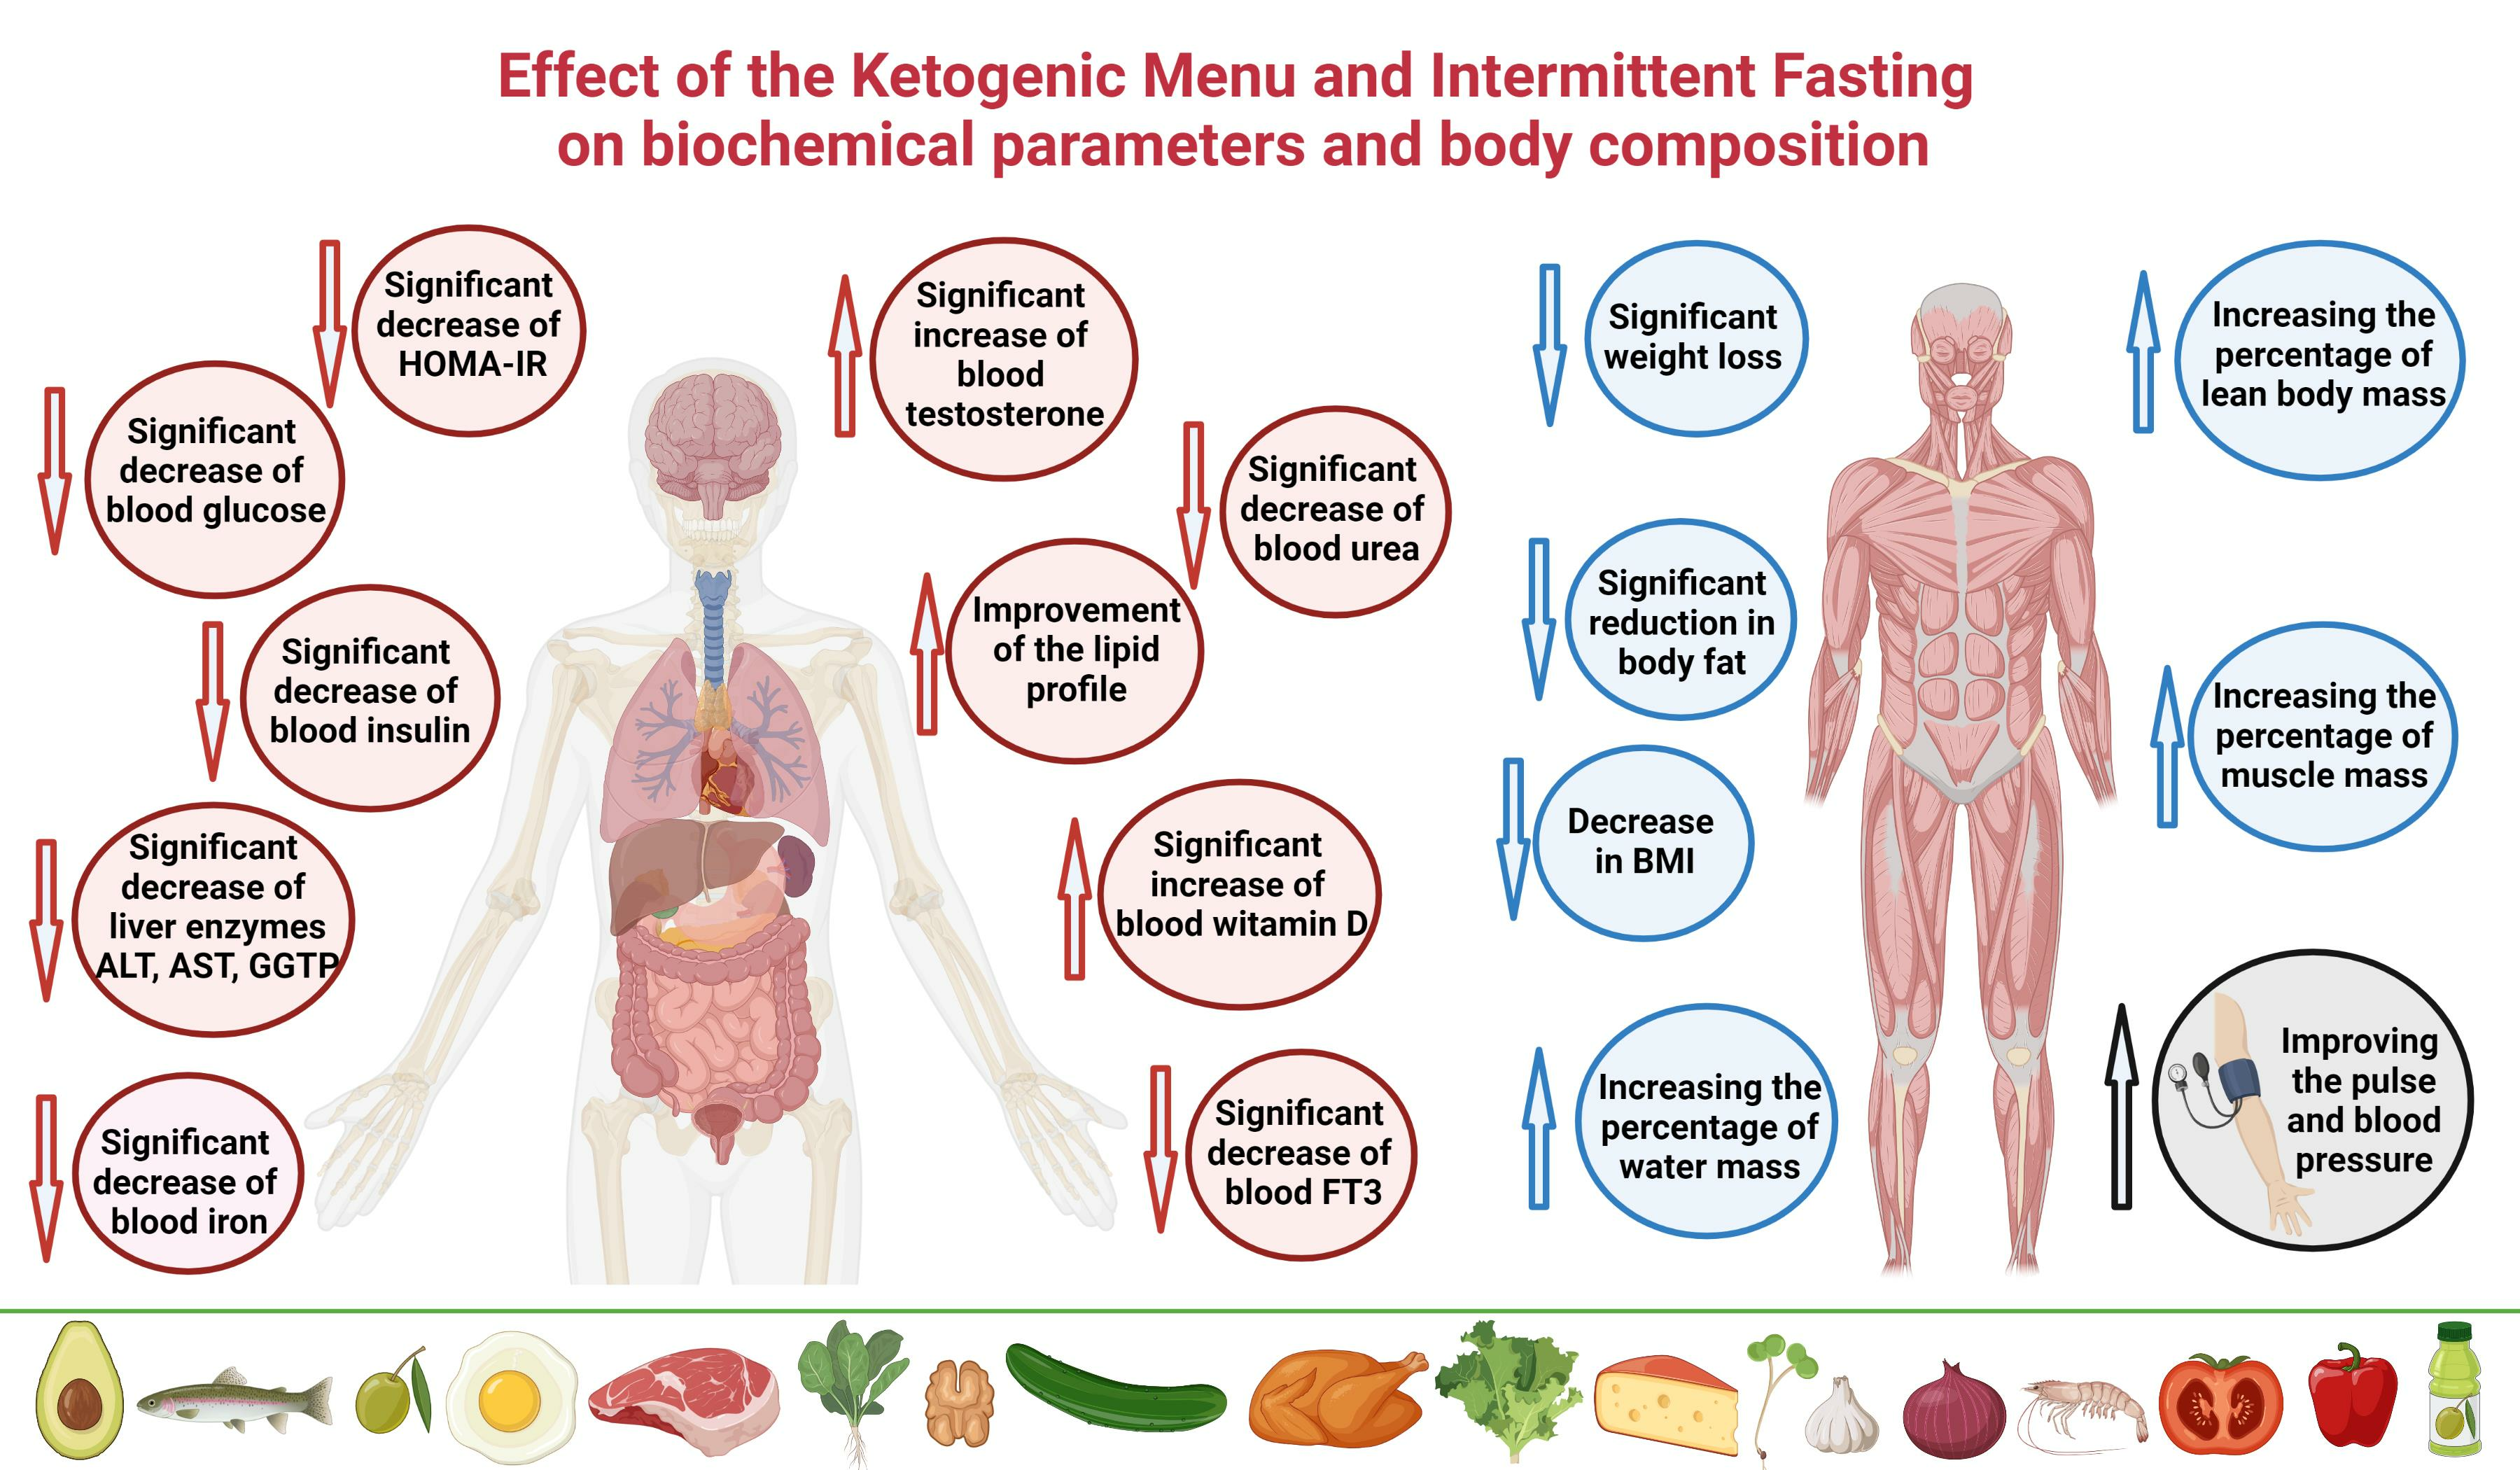 Foods Free Full-Text Keto Menuandndash;Effect of Ketogenic Menu and Intermittent Fasting on the Biochemical Markers and Body Composition in a Physically Active Manandmdash;A Controlled Case Study image